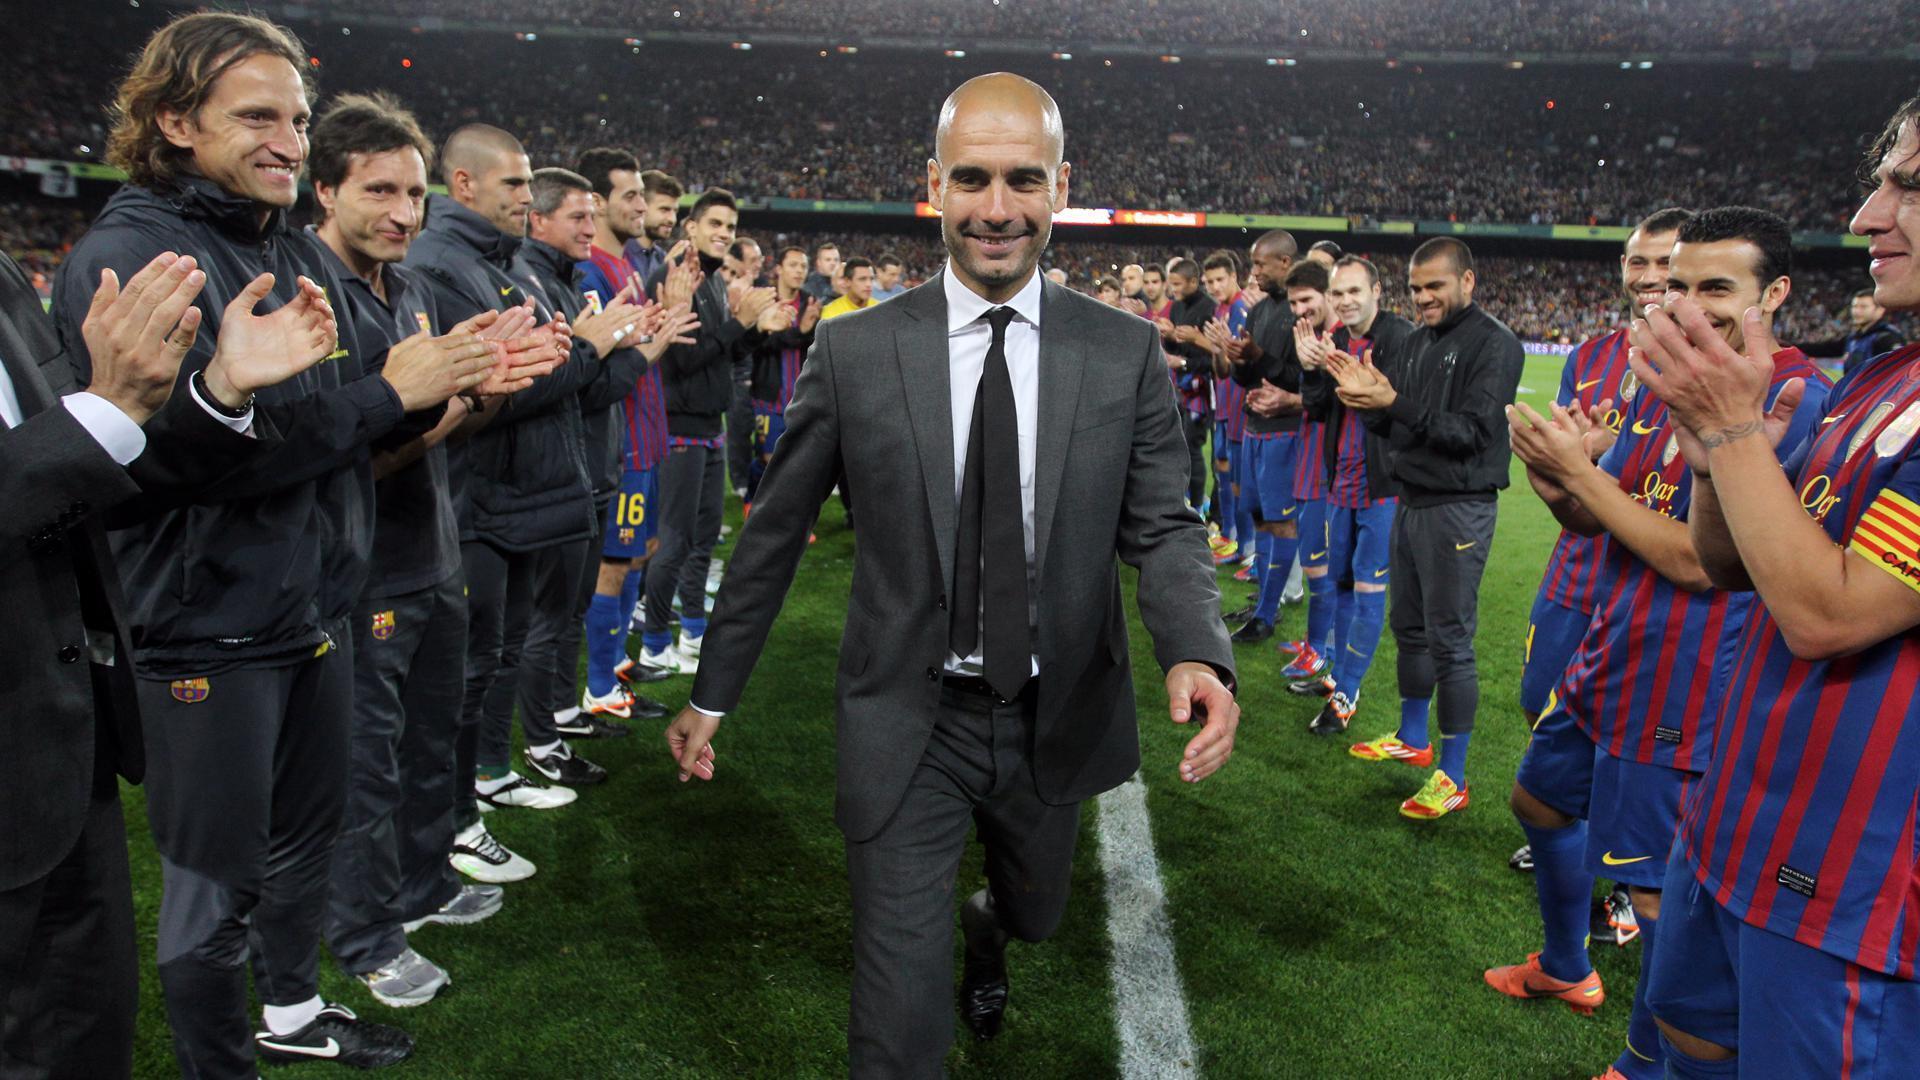 Pep Guardiola being given a guard of honor. Image Credit: FC Barcelona